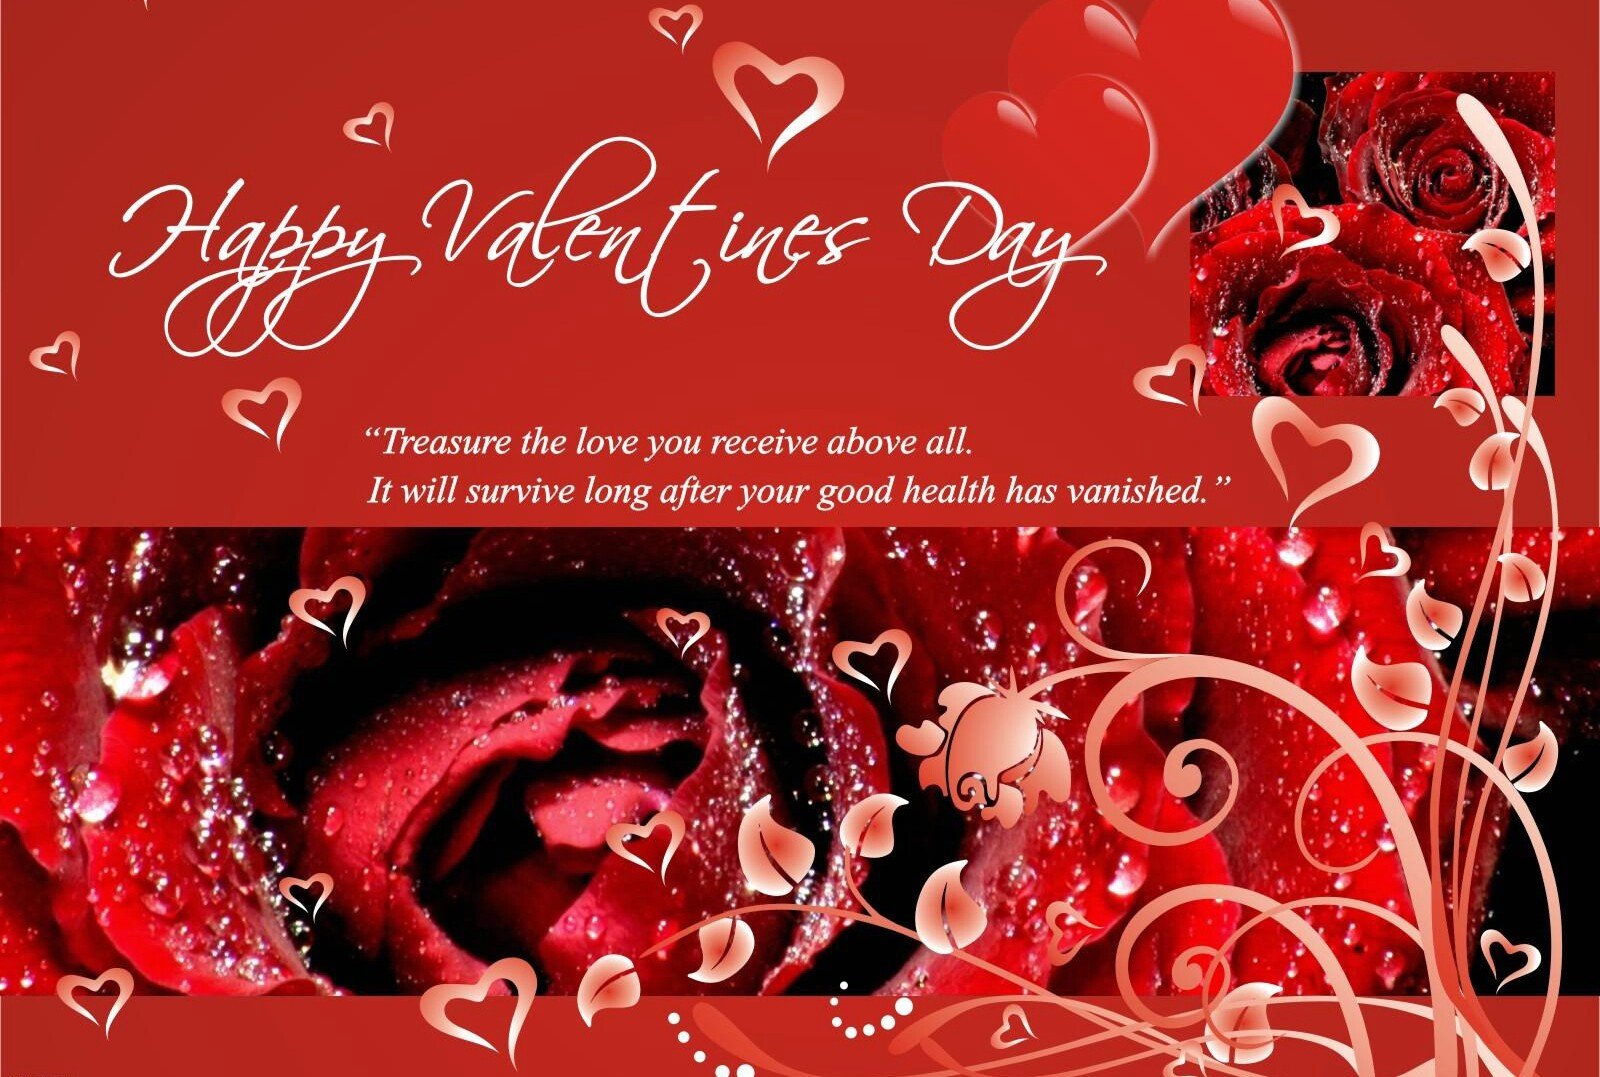 Quotes For Valentines Day Cards
 Happy Valentine s Day Quotes on Cards Funny